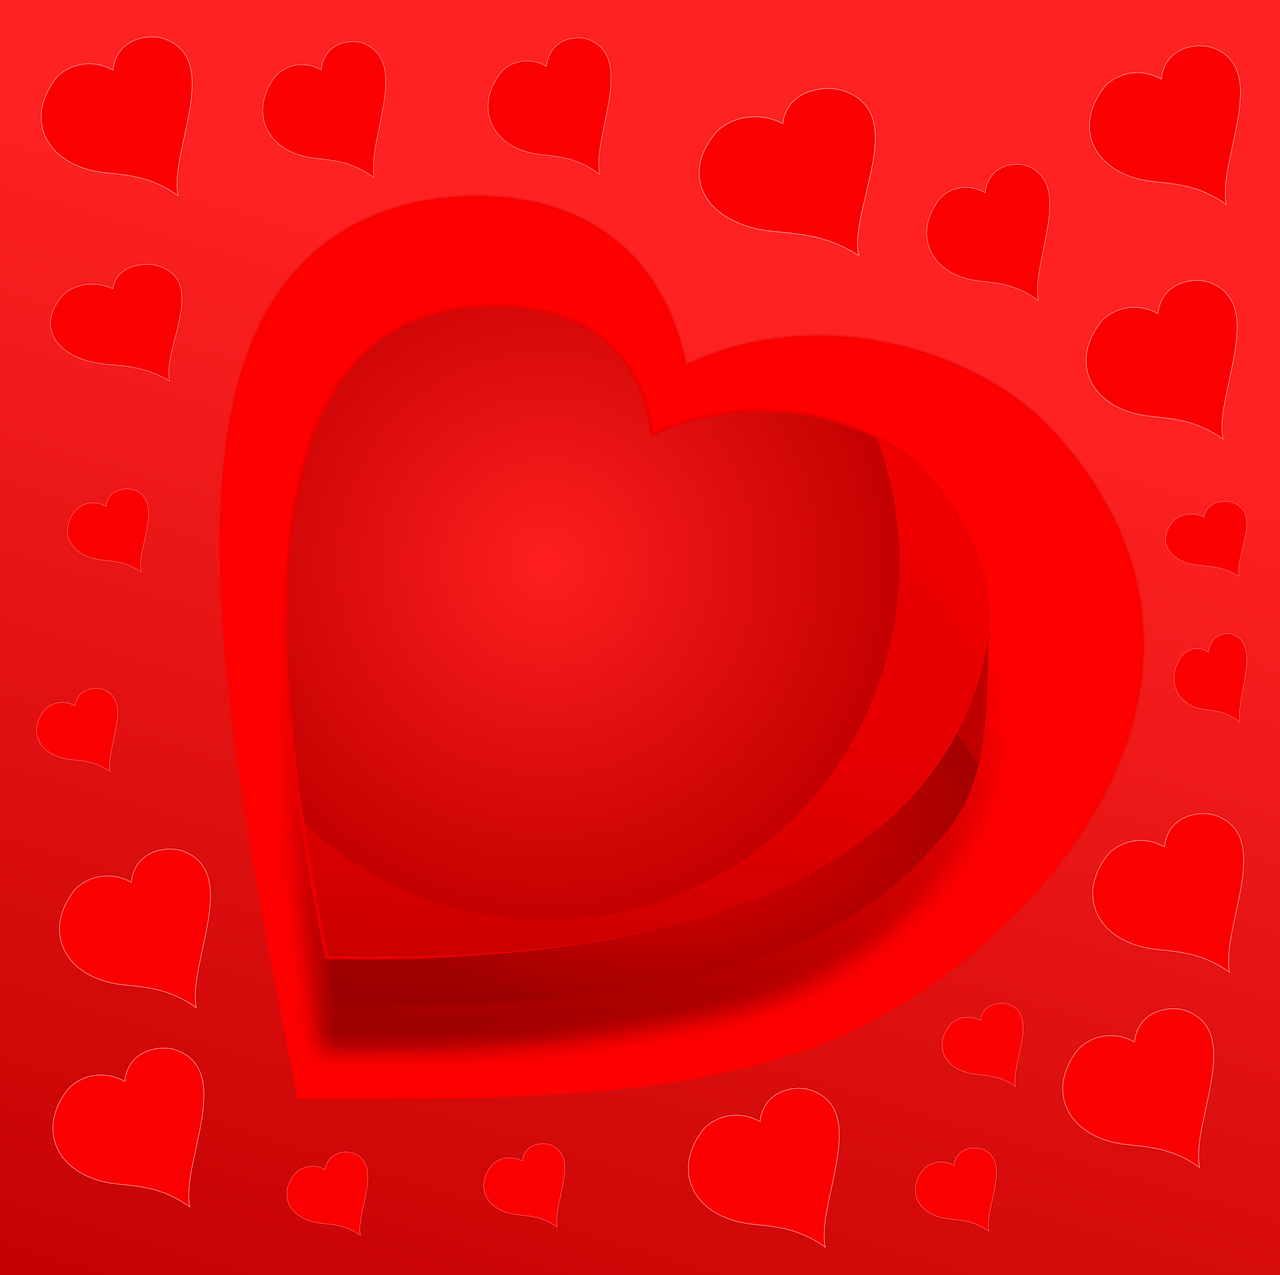 heart,love,red,valentine,romance,romantic,passion,sweetheart,loveheart,free vector graphics,free pictures, free photos, free images, royalty free, free illustrations, public domain